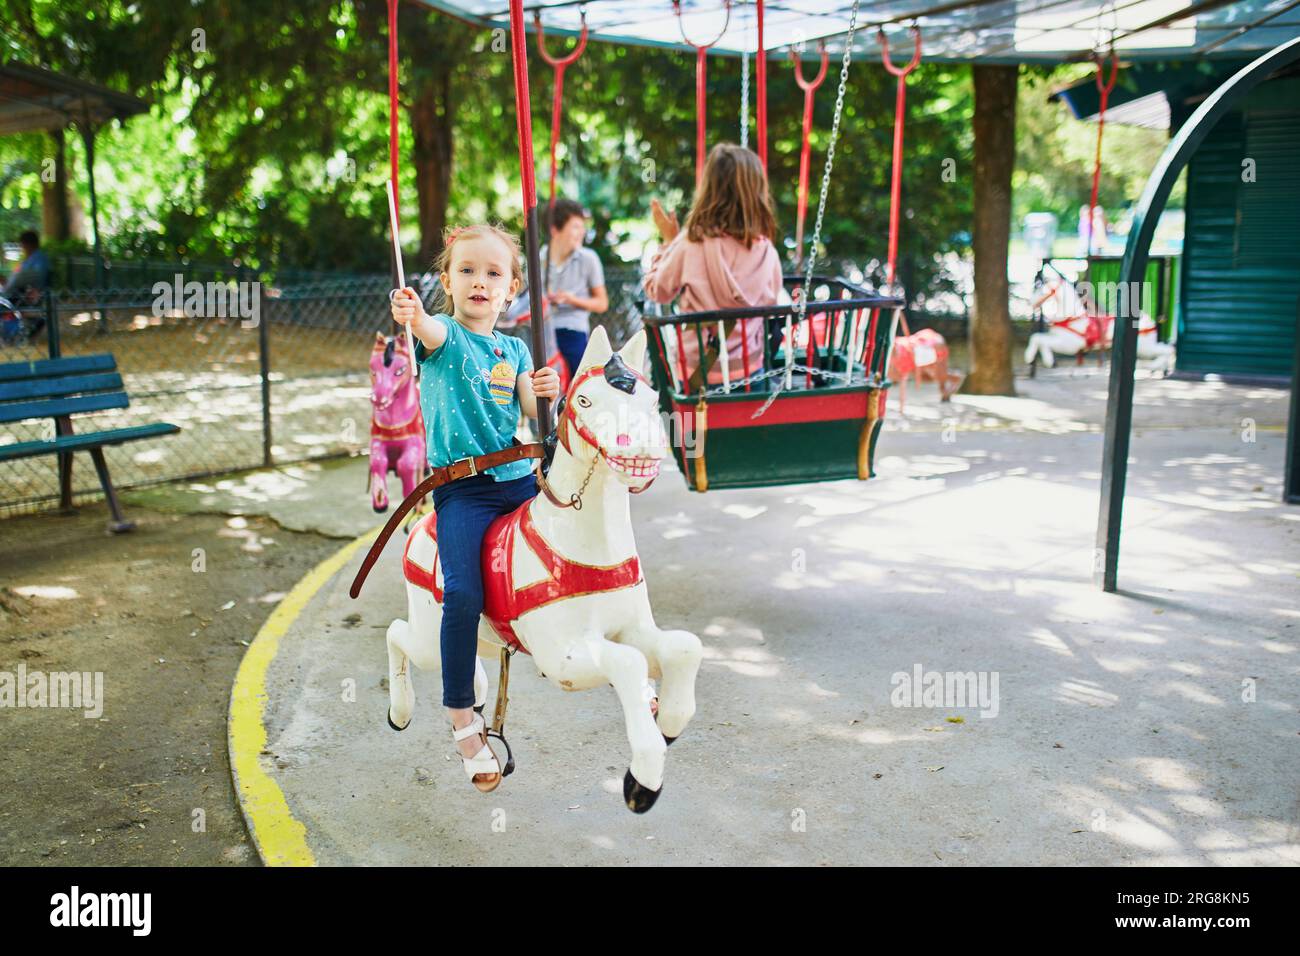 Adorable preschooler girl on a horse of traditional Parisian vintage merry-go-round where children have to catch and collect metallic rings with a sti Stock Photo